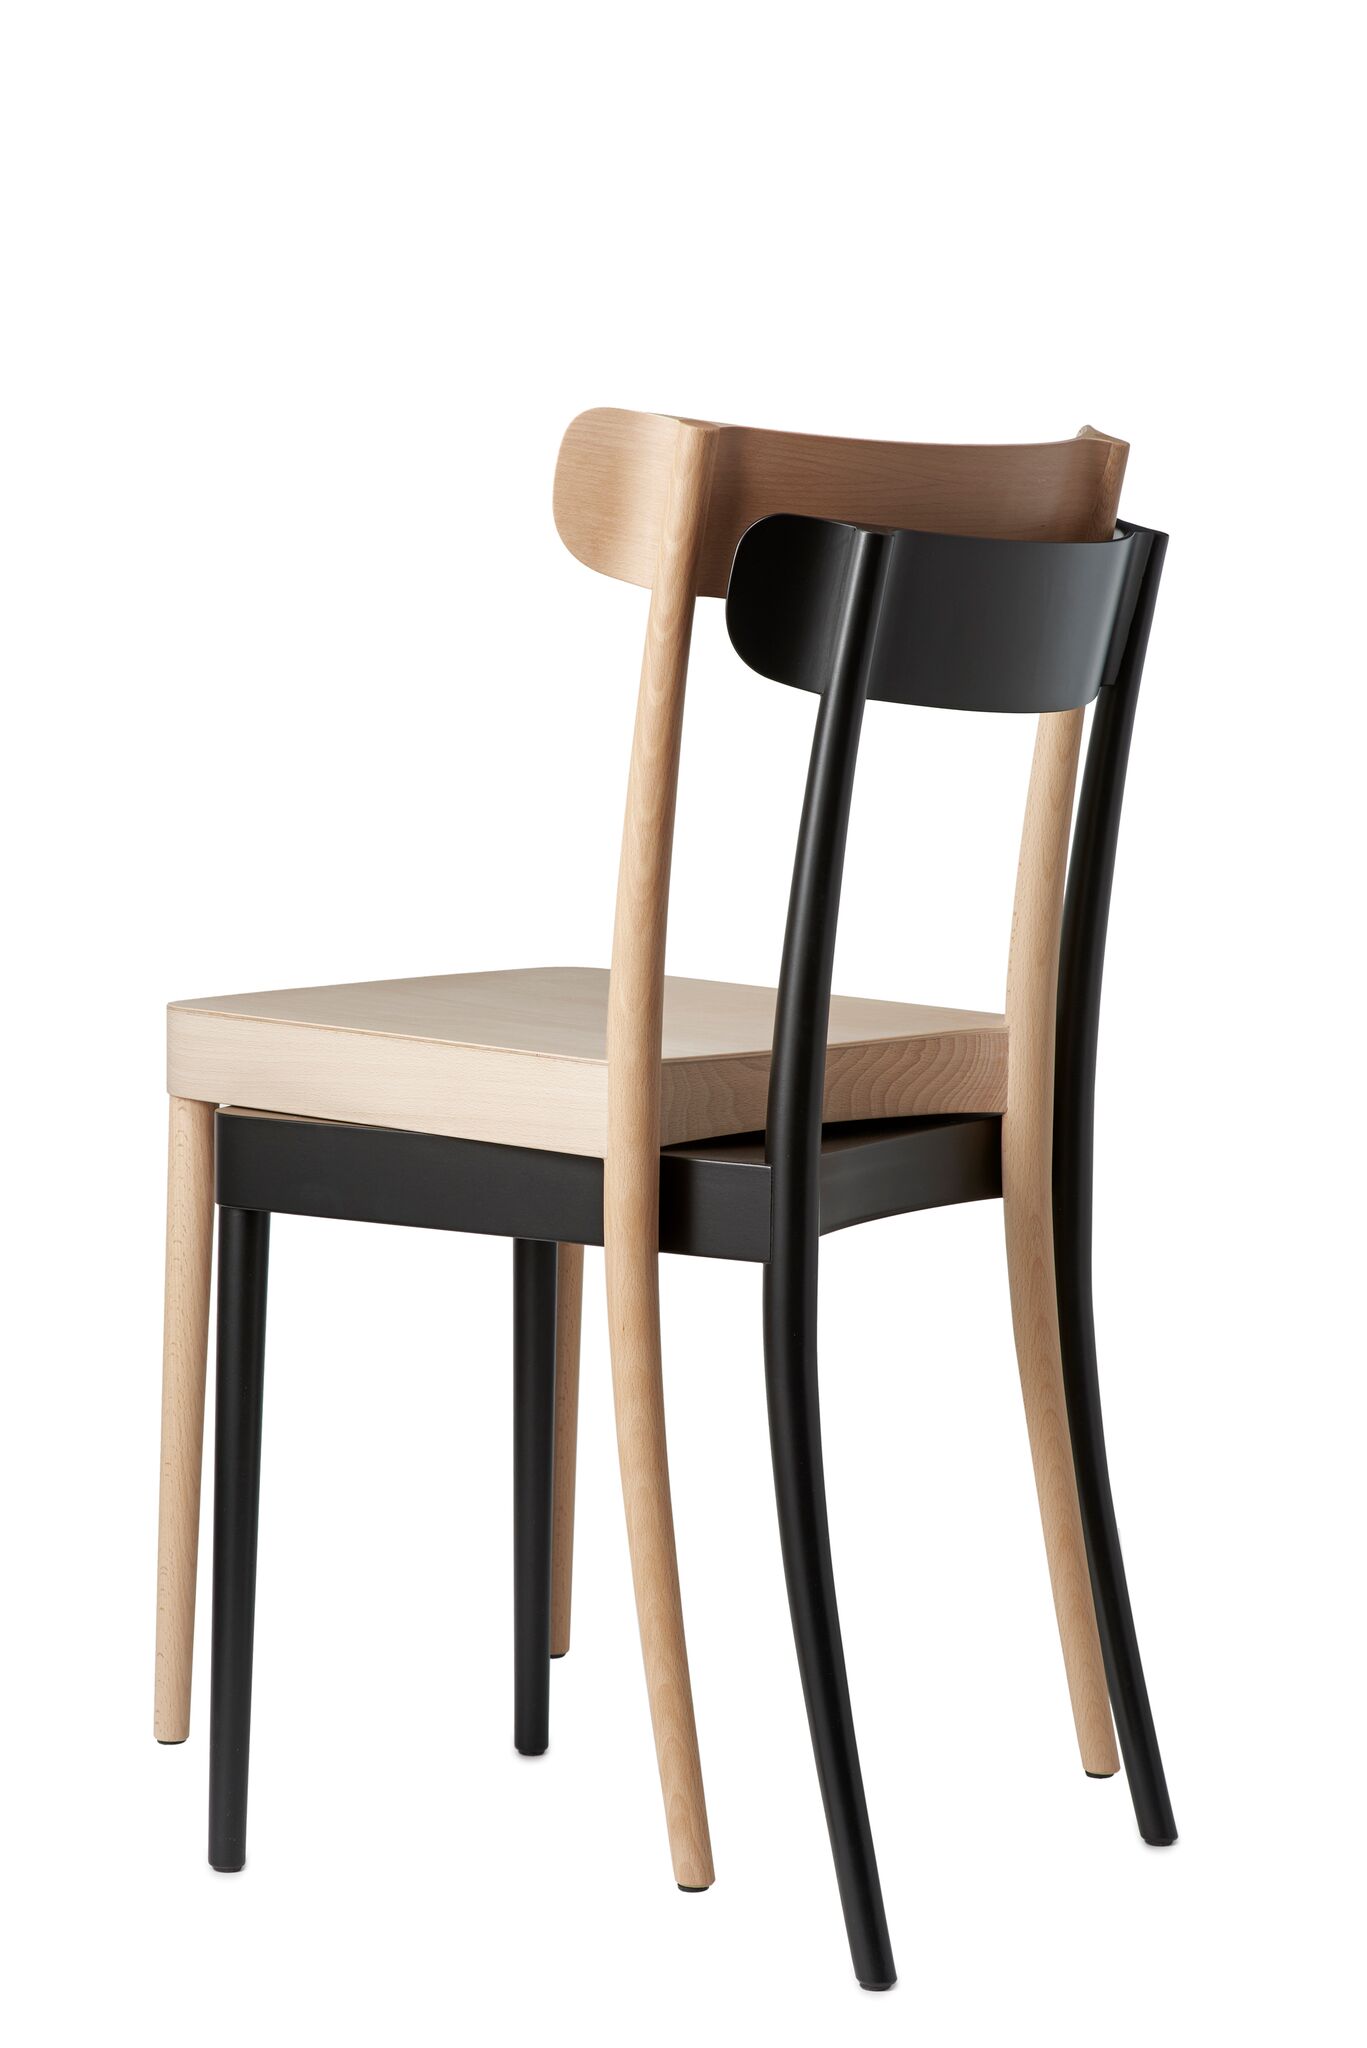 Petite Chairs by David Ericsson for Gärsnäs